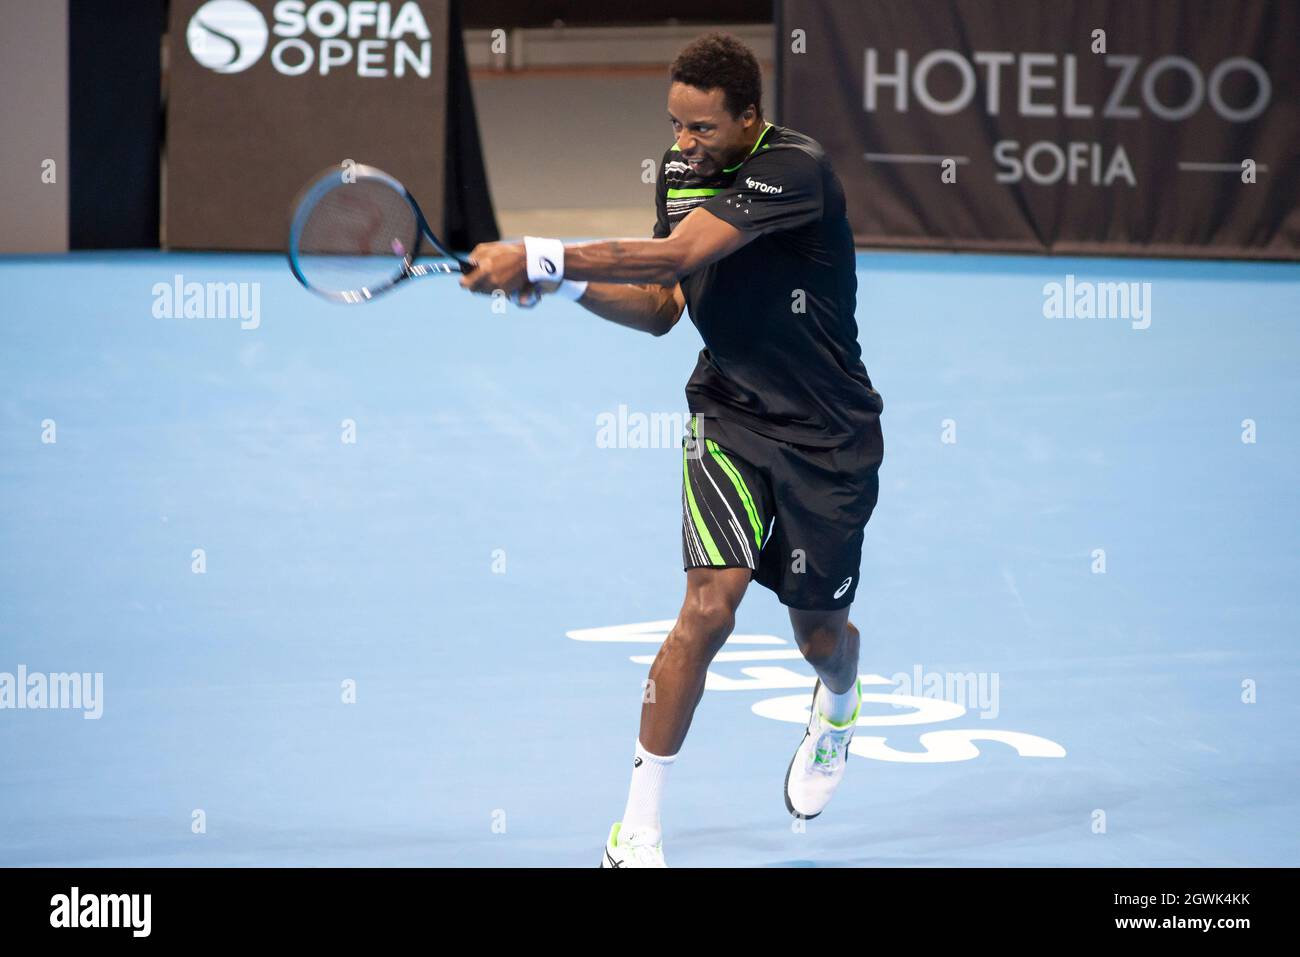 Gael Monfils of France playing against  Jannik Sinner of Italy during the final of the Sofia Open 2021 ATP 250 indoor tennis tournament on hard courts, Alamy Live News Stock Photo